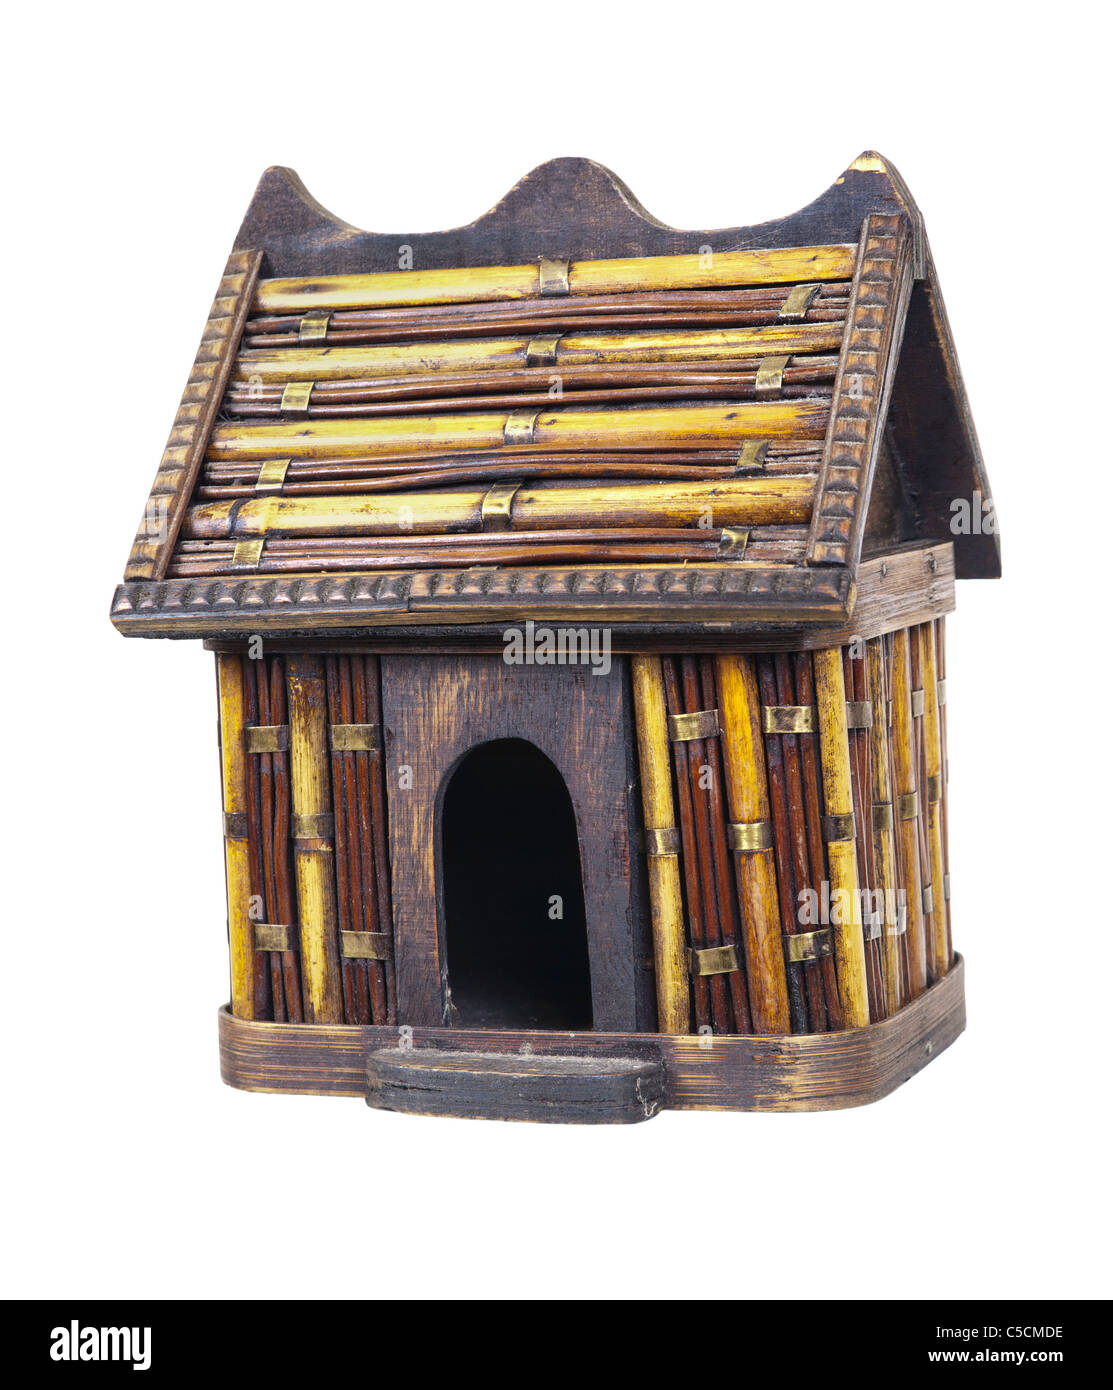 Rustic bamboo birdhouse for blending in with the neighbors - path included Stock Photo